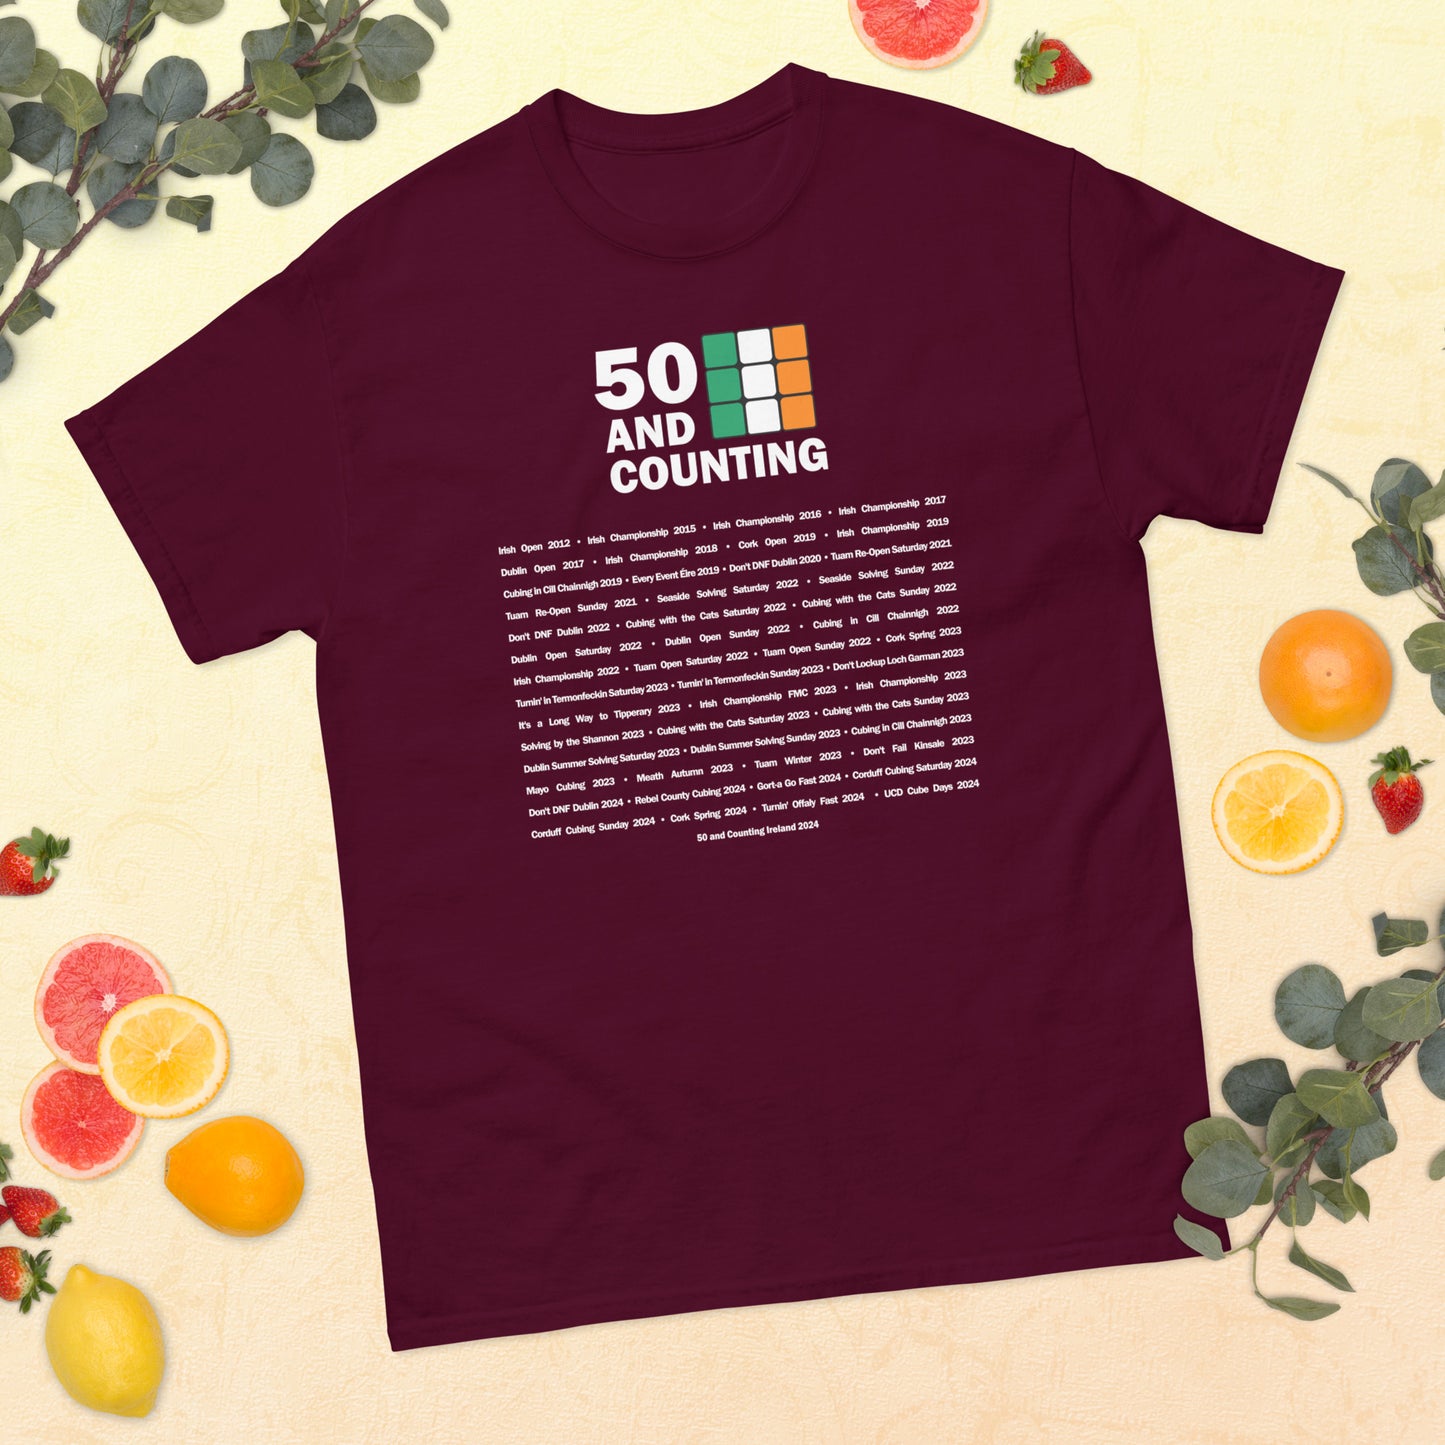 50 Comps TShirt (Dark) | 50 and Counting